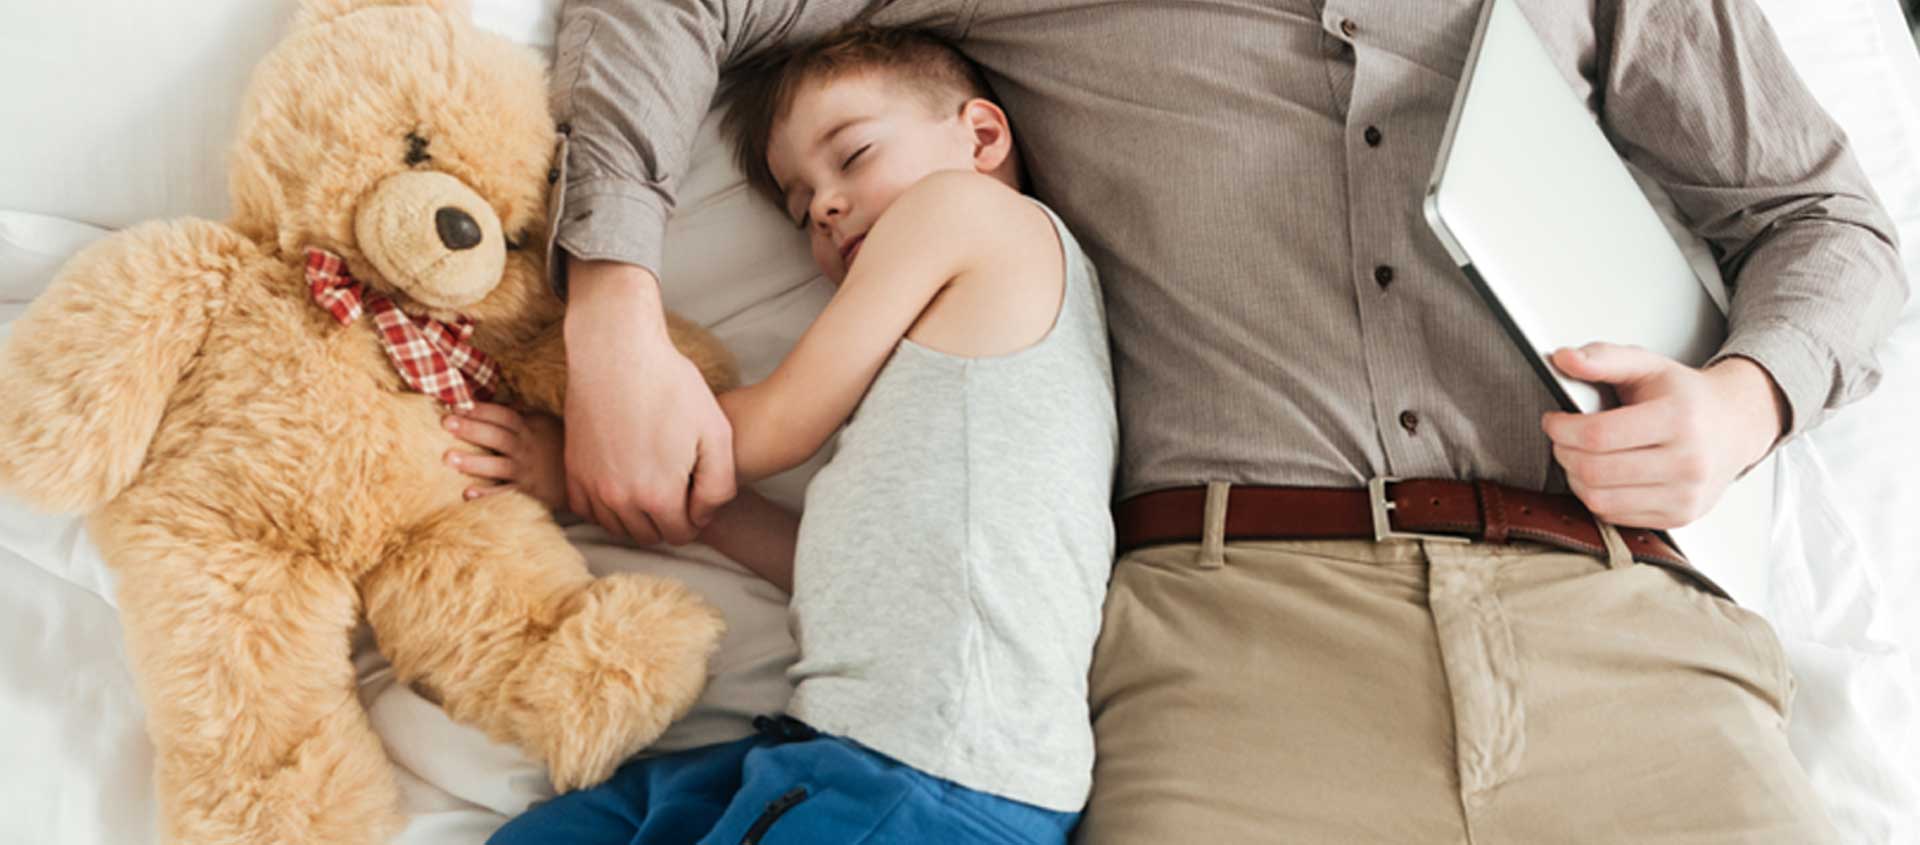 A child sleeps next to an adult in a bed.